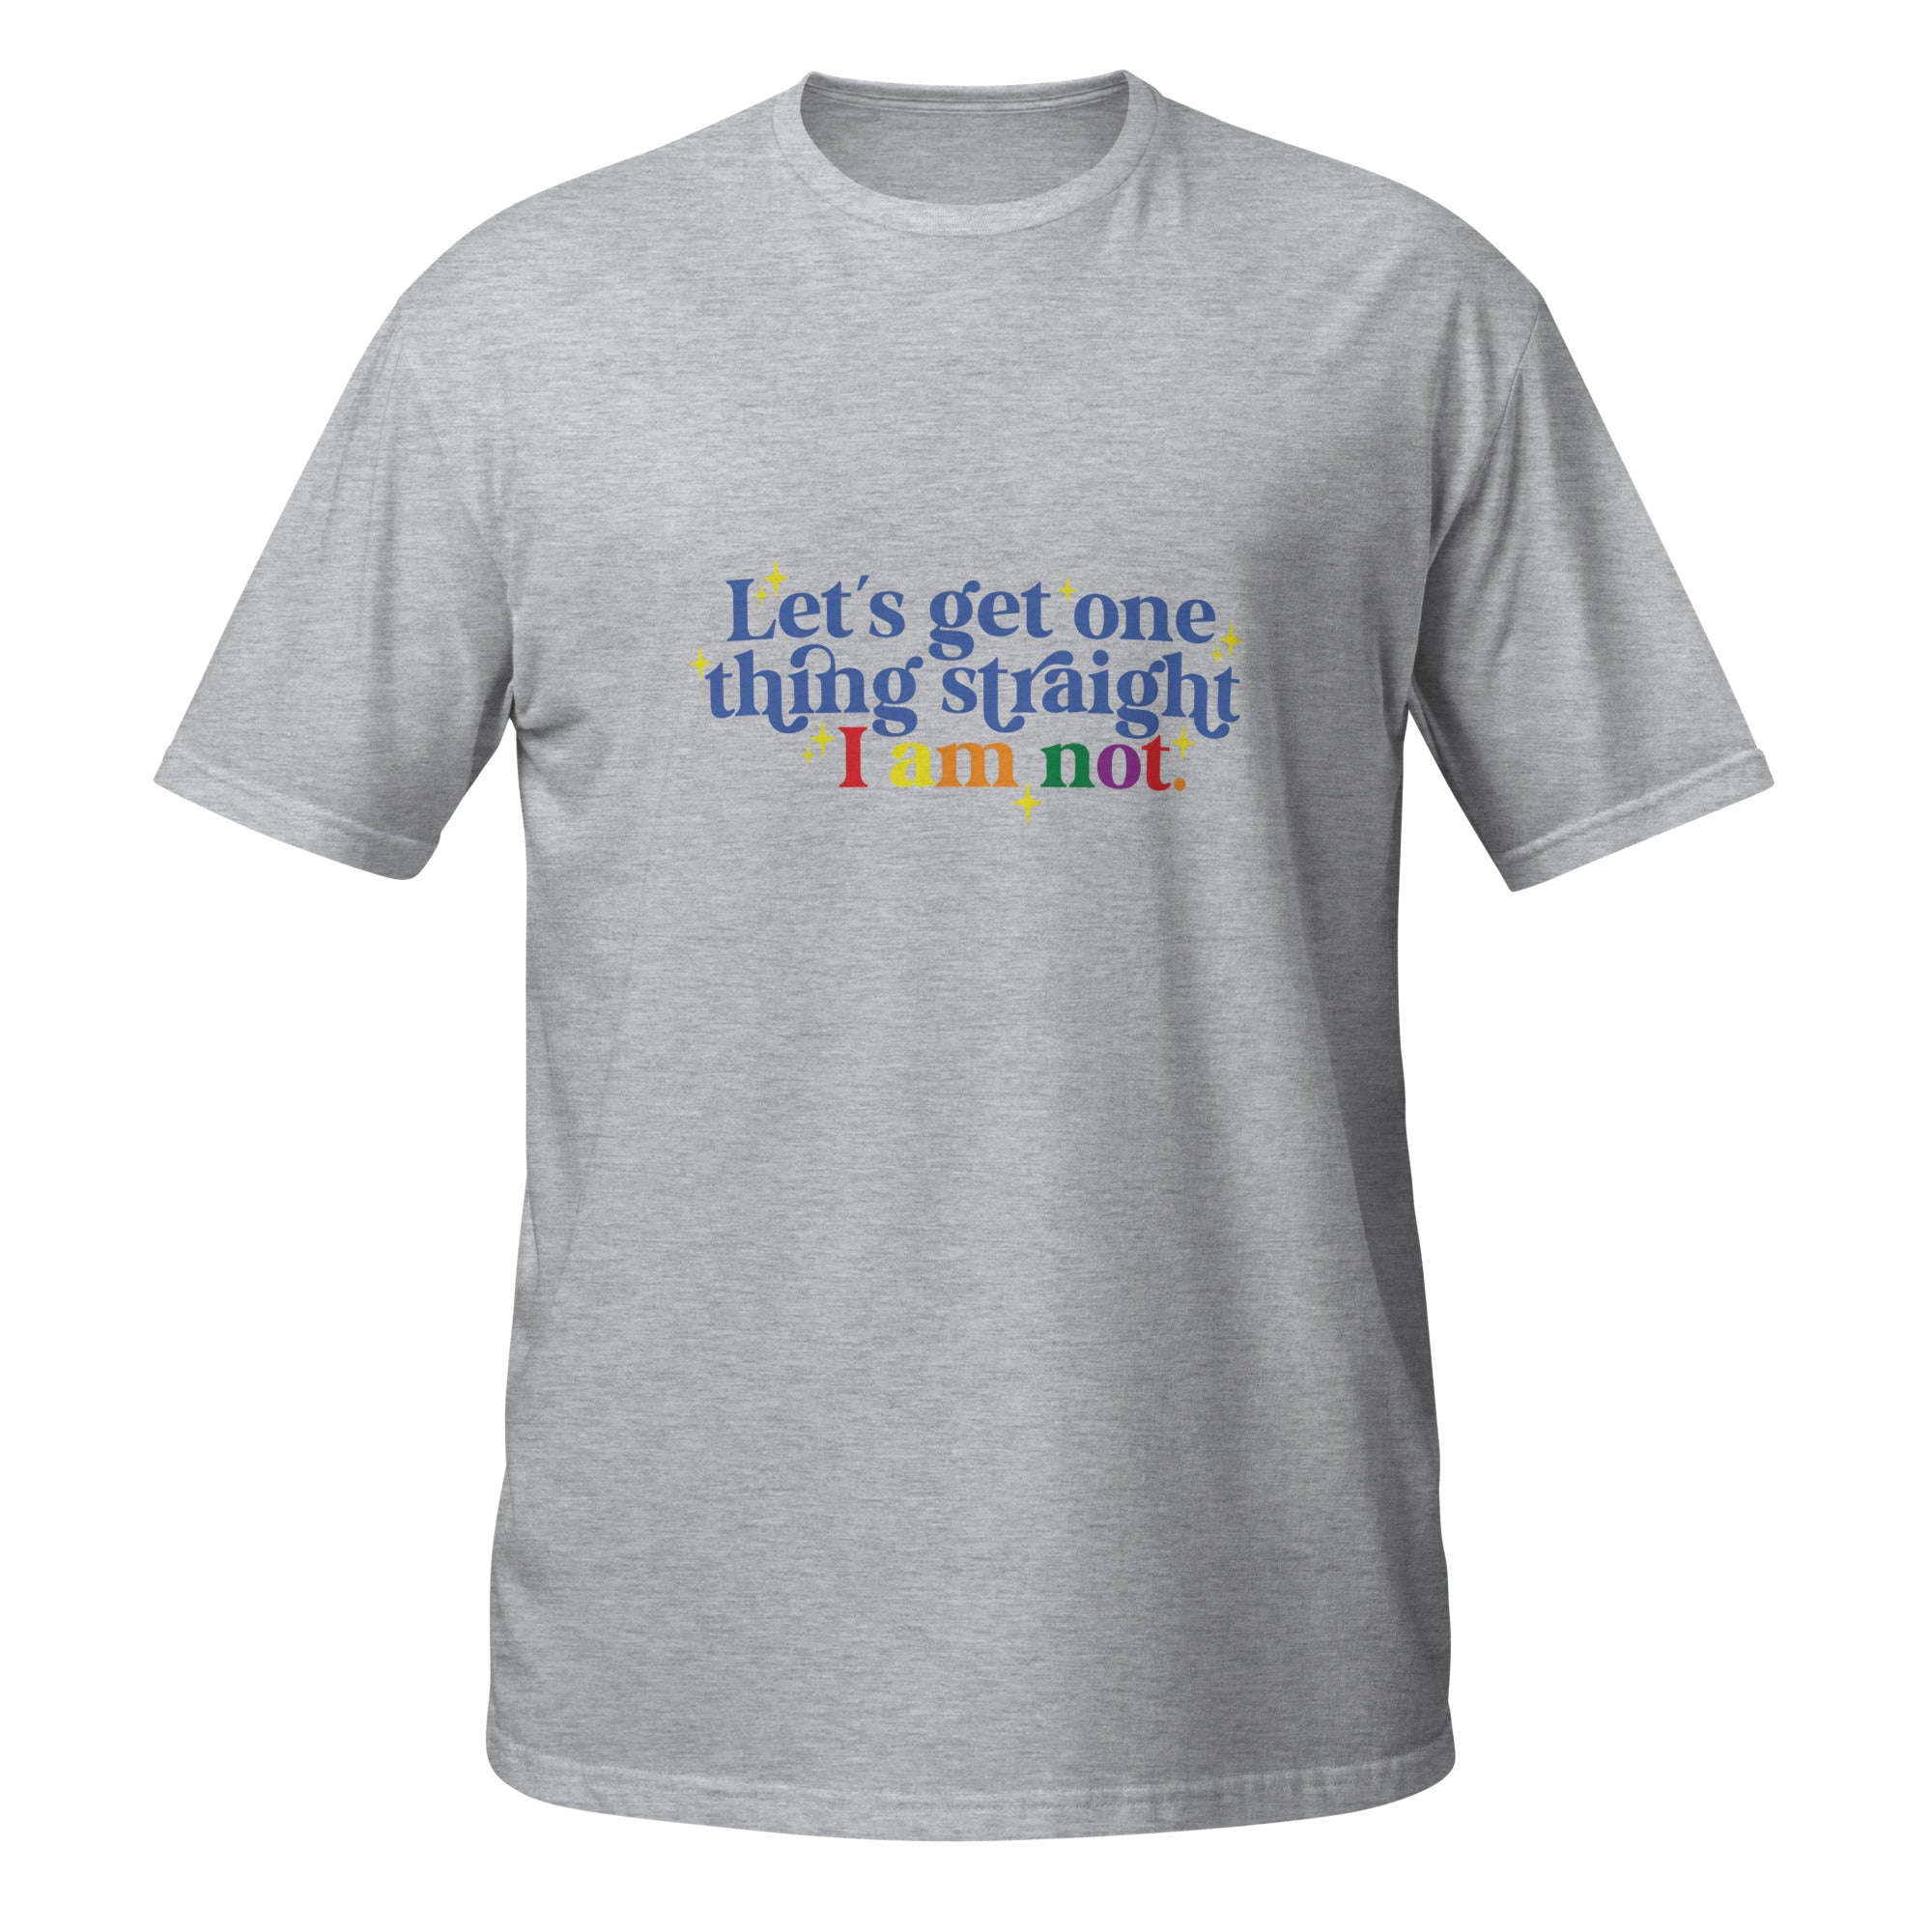 Short-Sleeve Unisex T-Shirt- Let's get one thing straight I am not